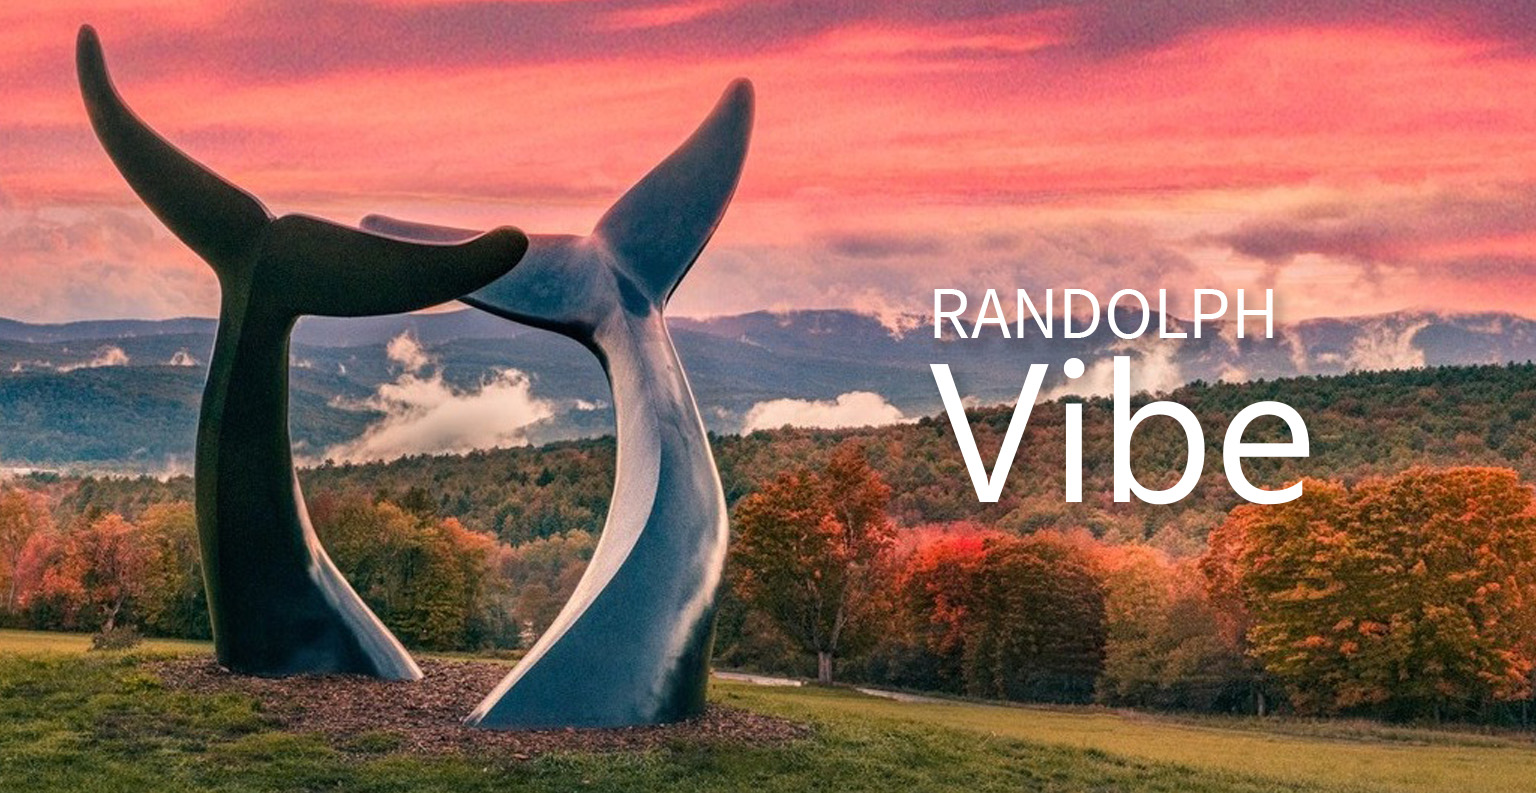 Randolph Vibe - Whales Tales sculture at dusk 